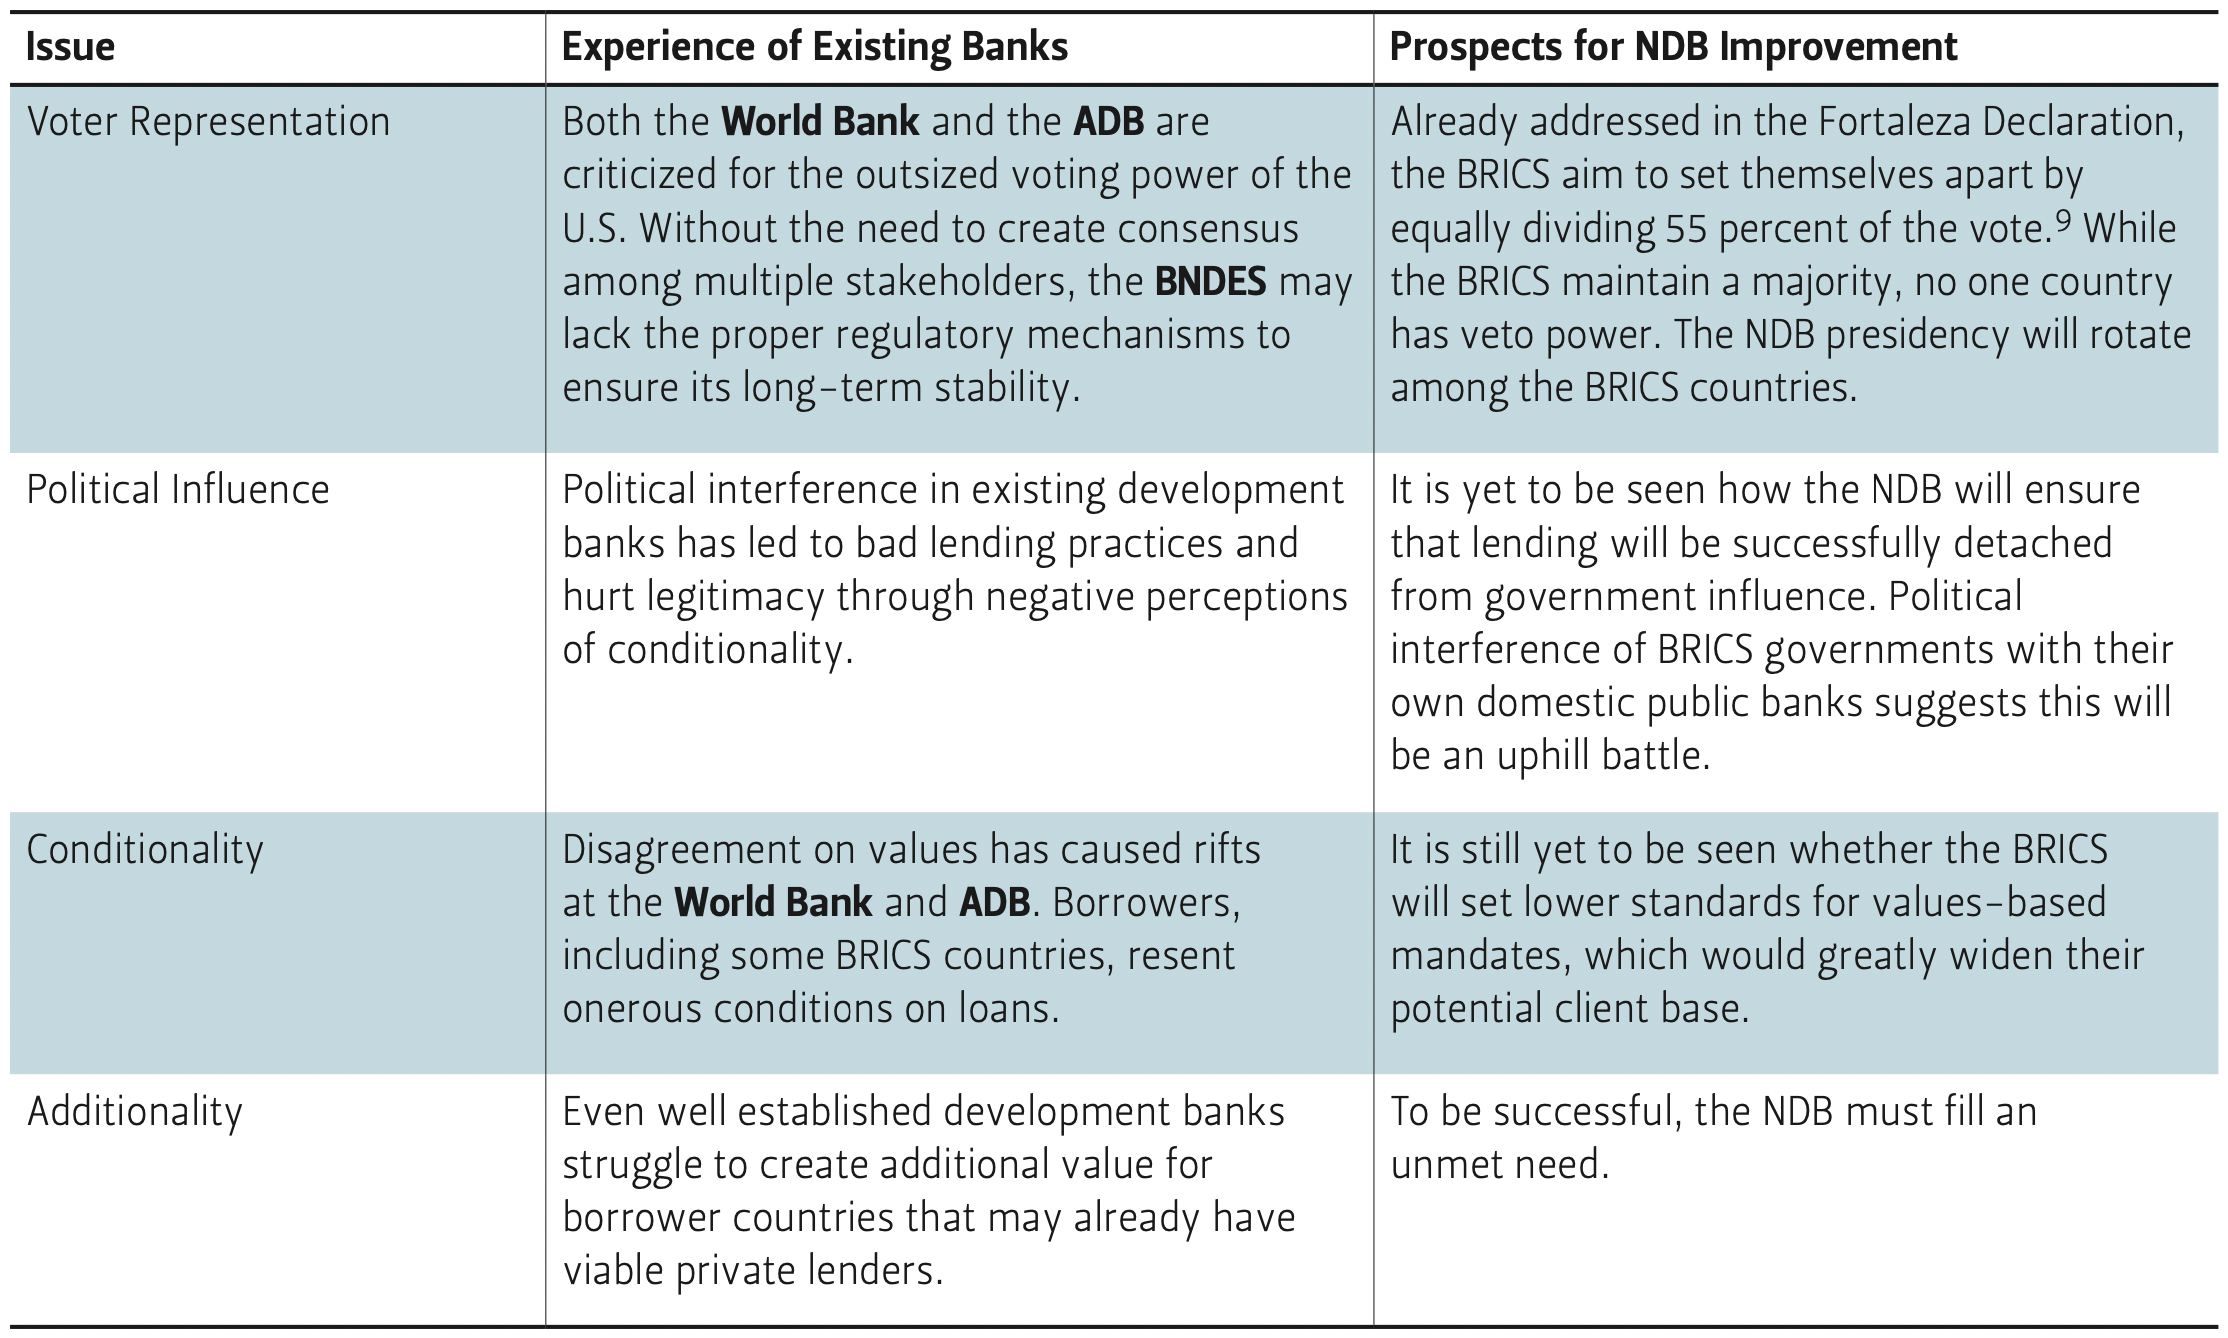 This table summarizes the key issues facing the new development bank.